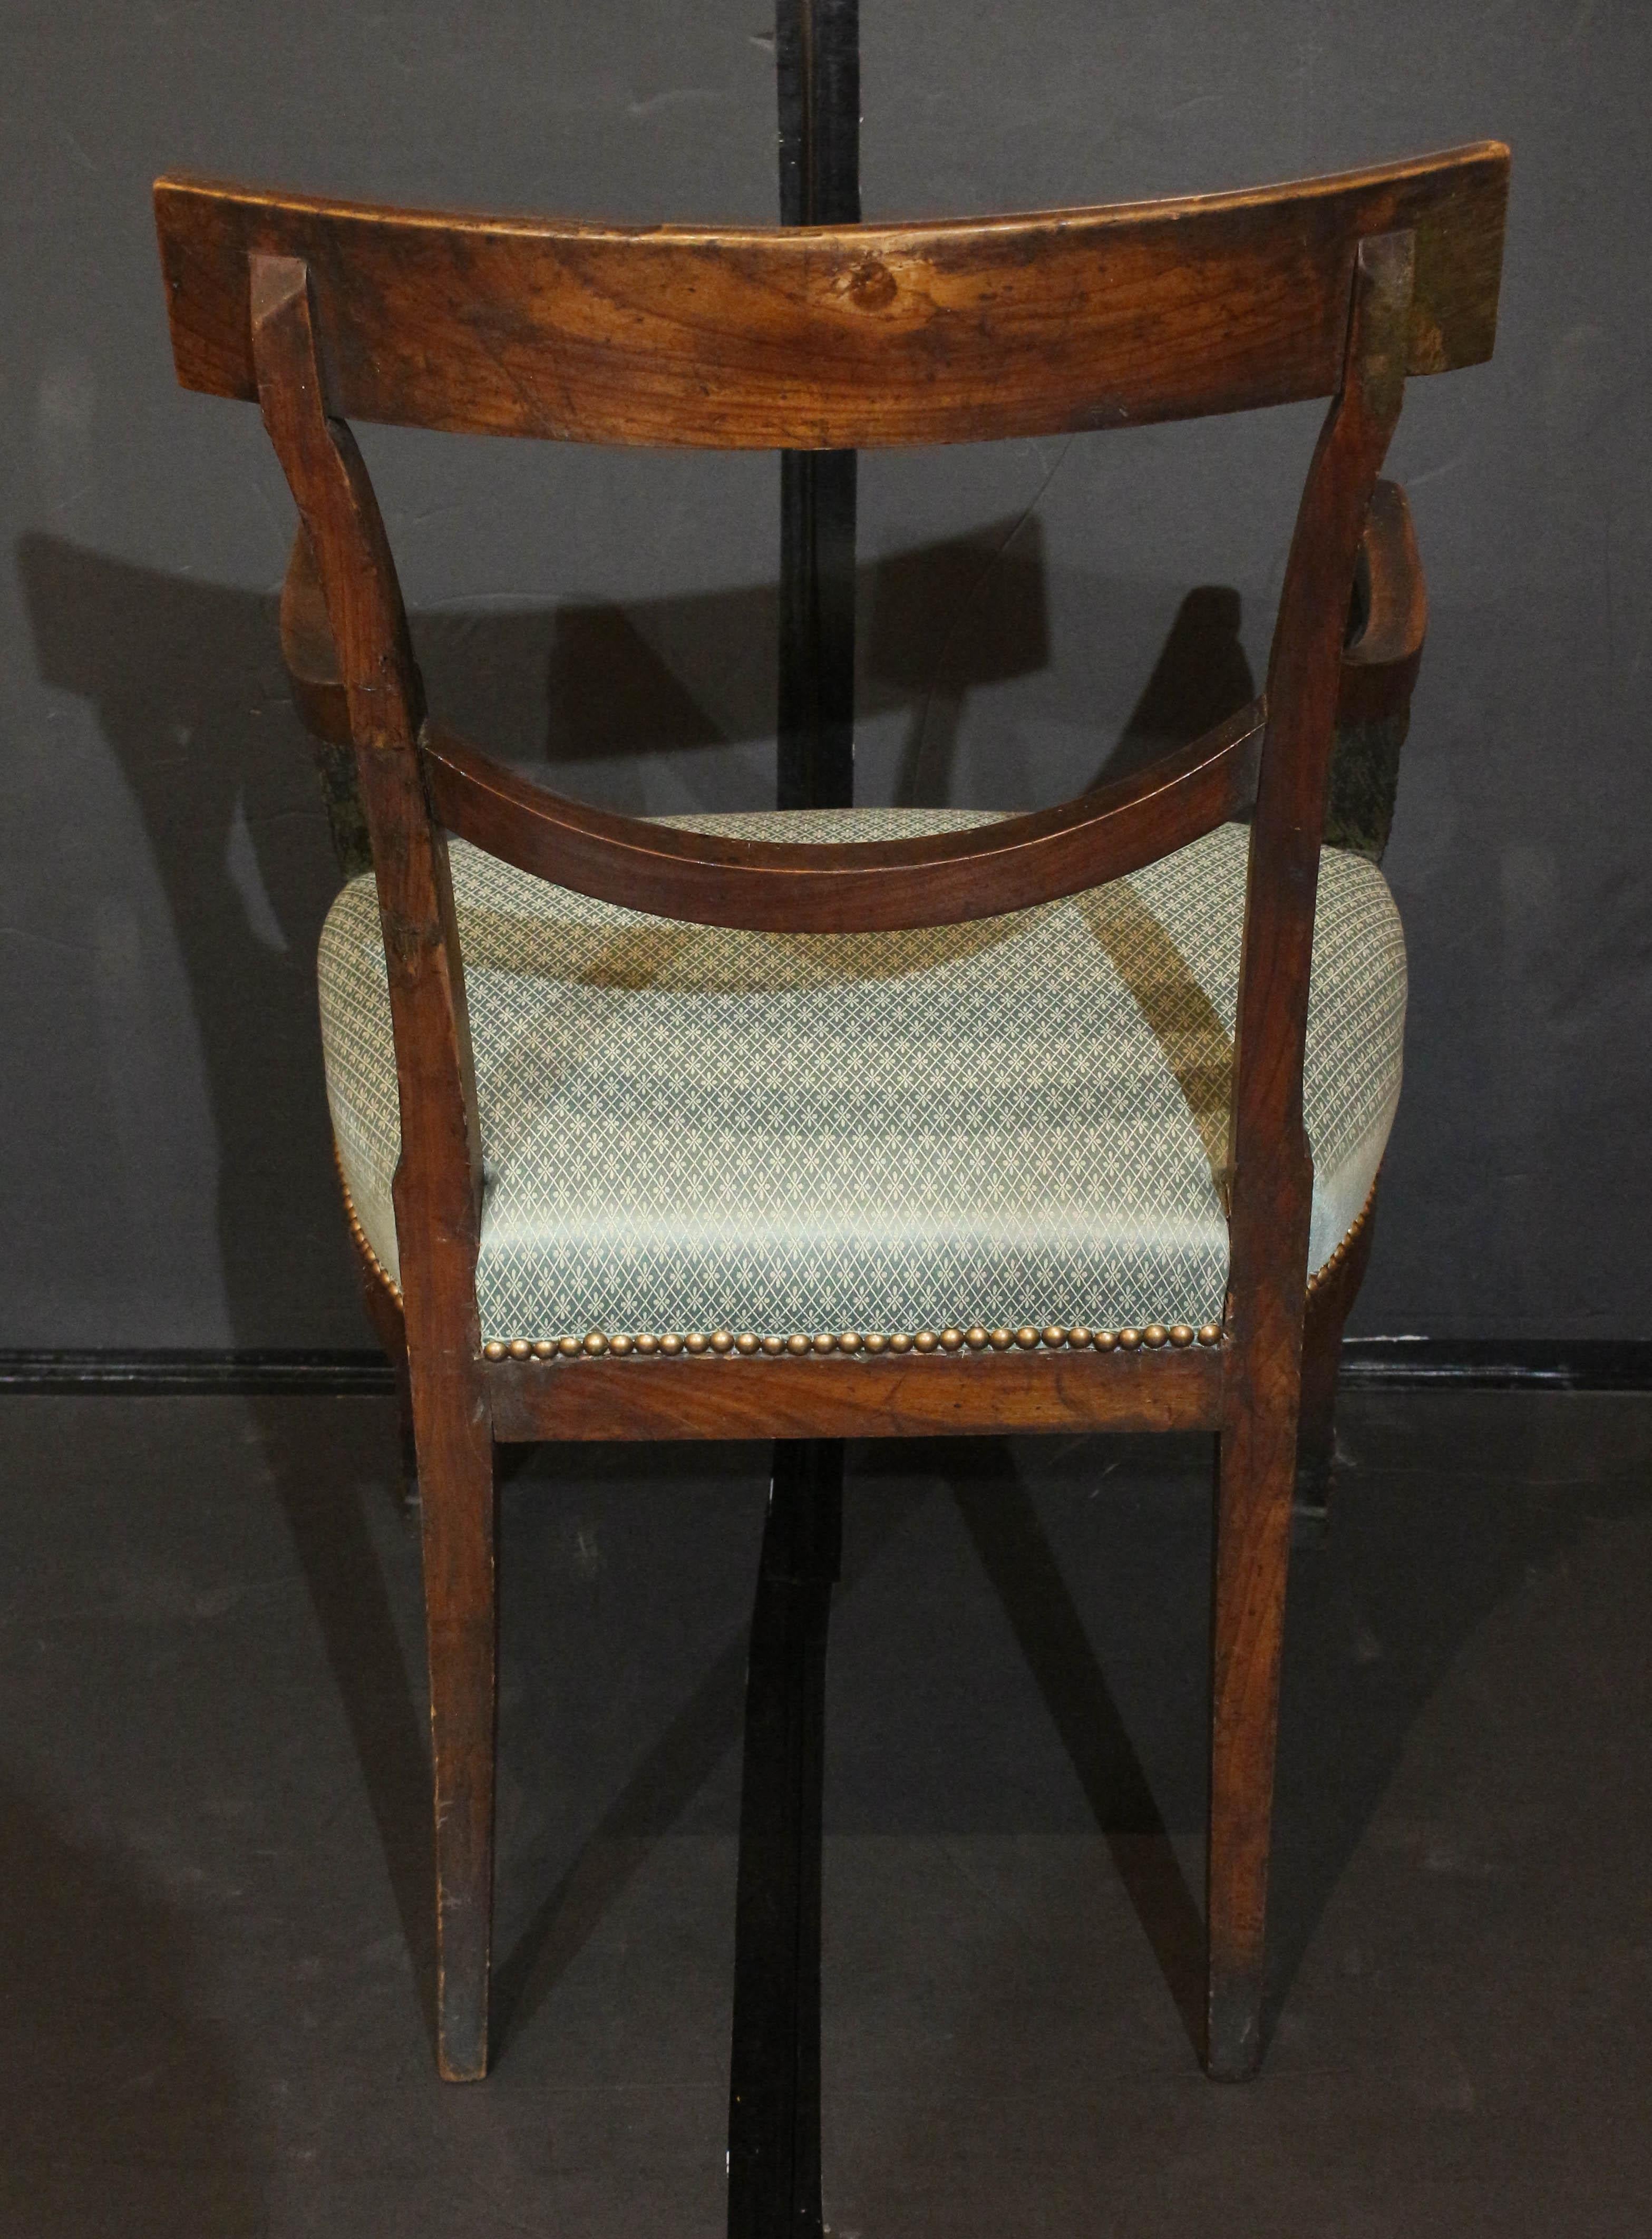 Early 19th Century Empire Period Fauteuil (or Open Arm Chair), French 1